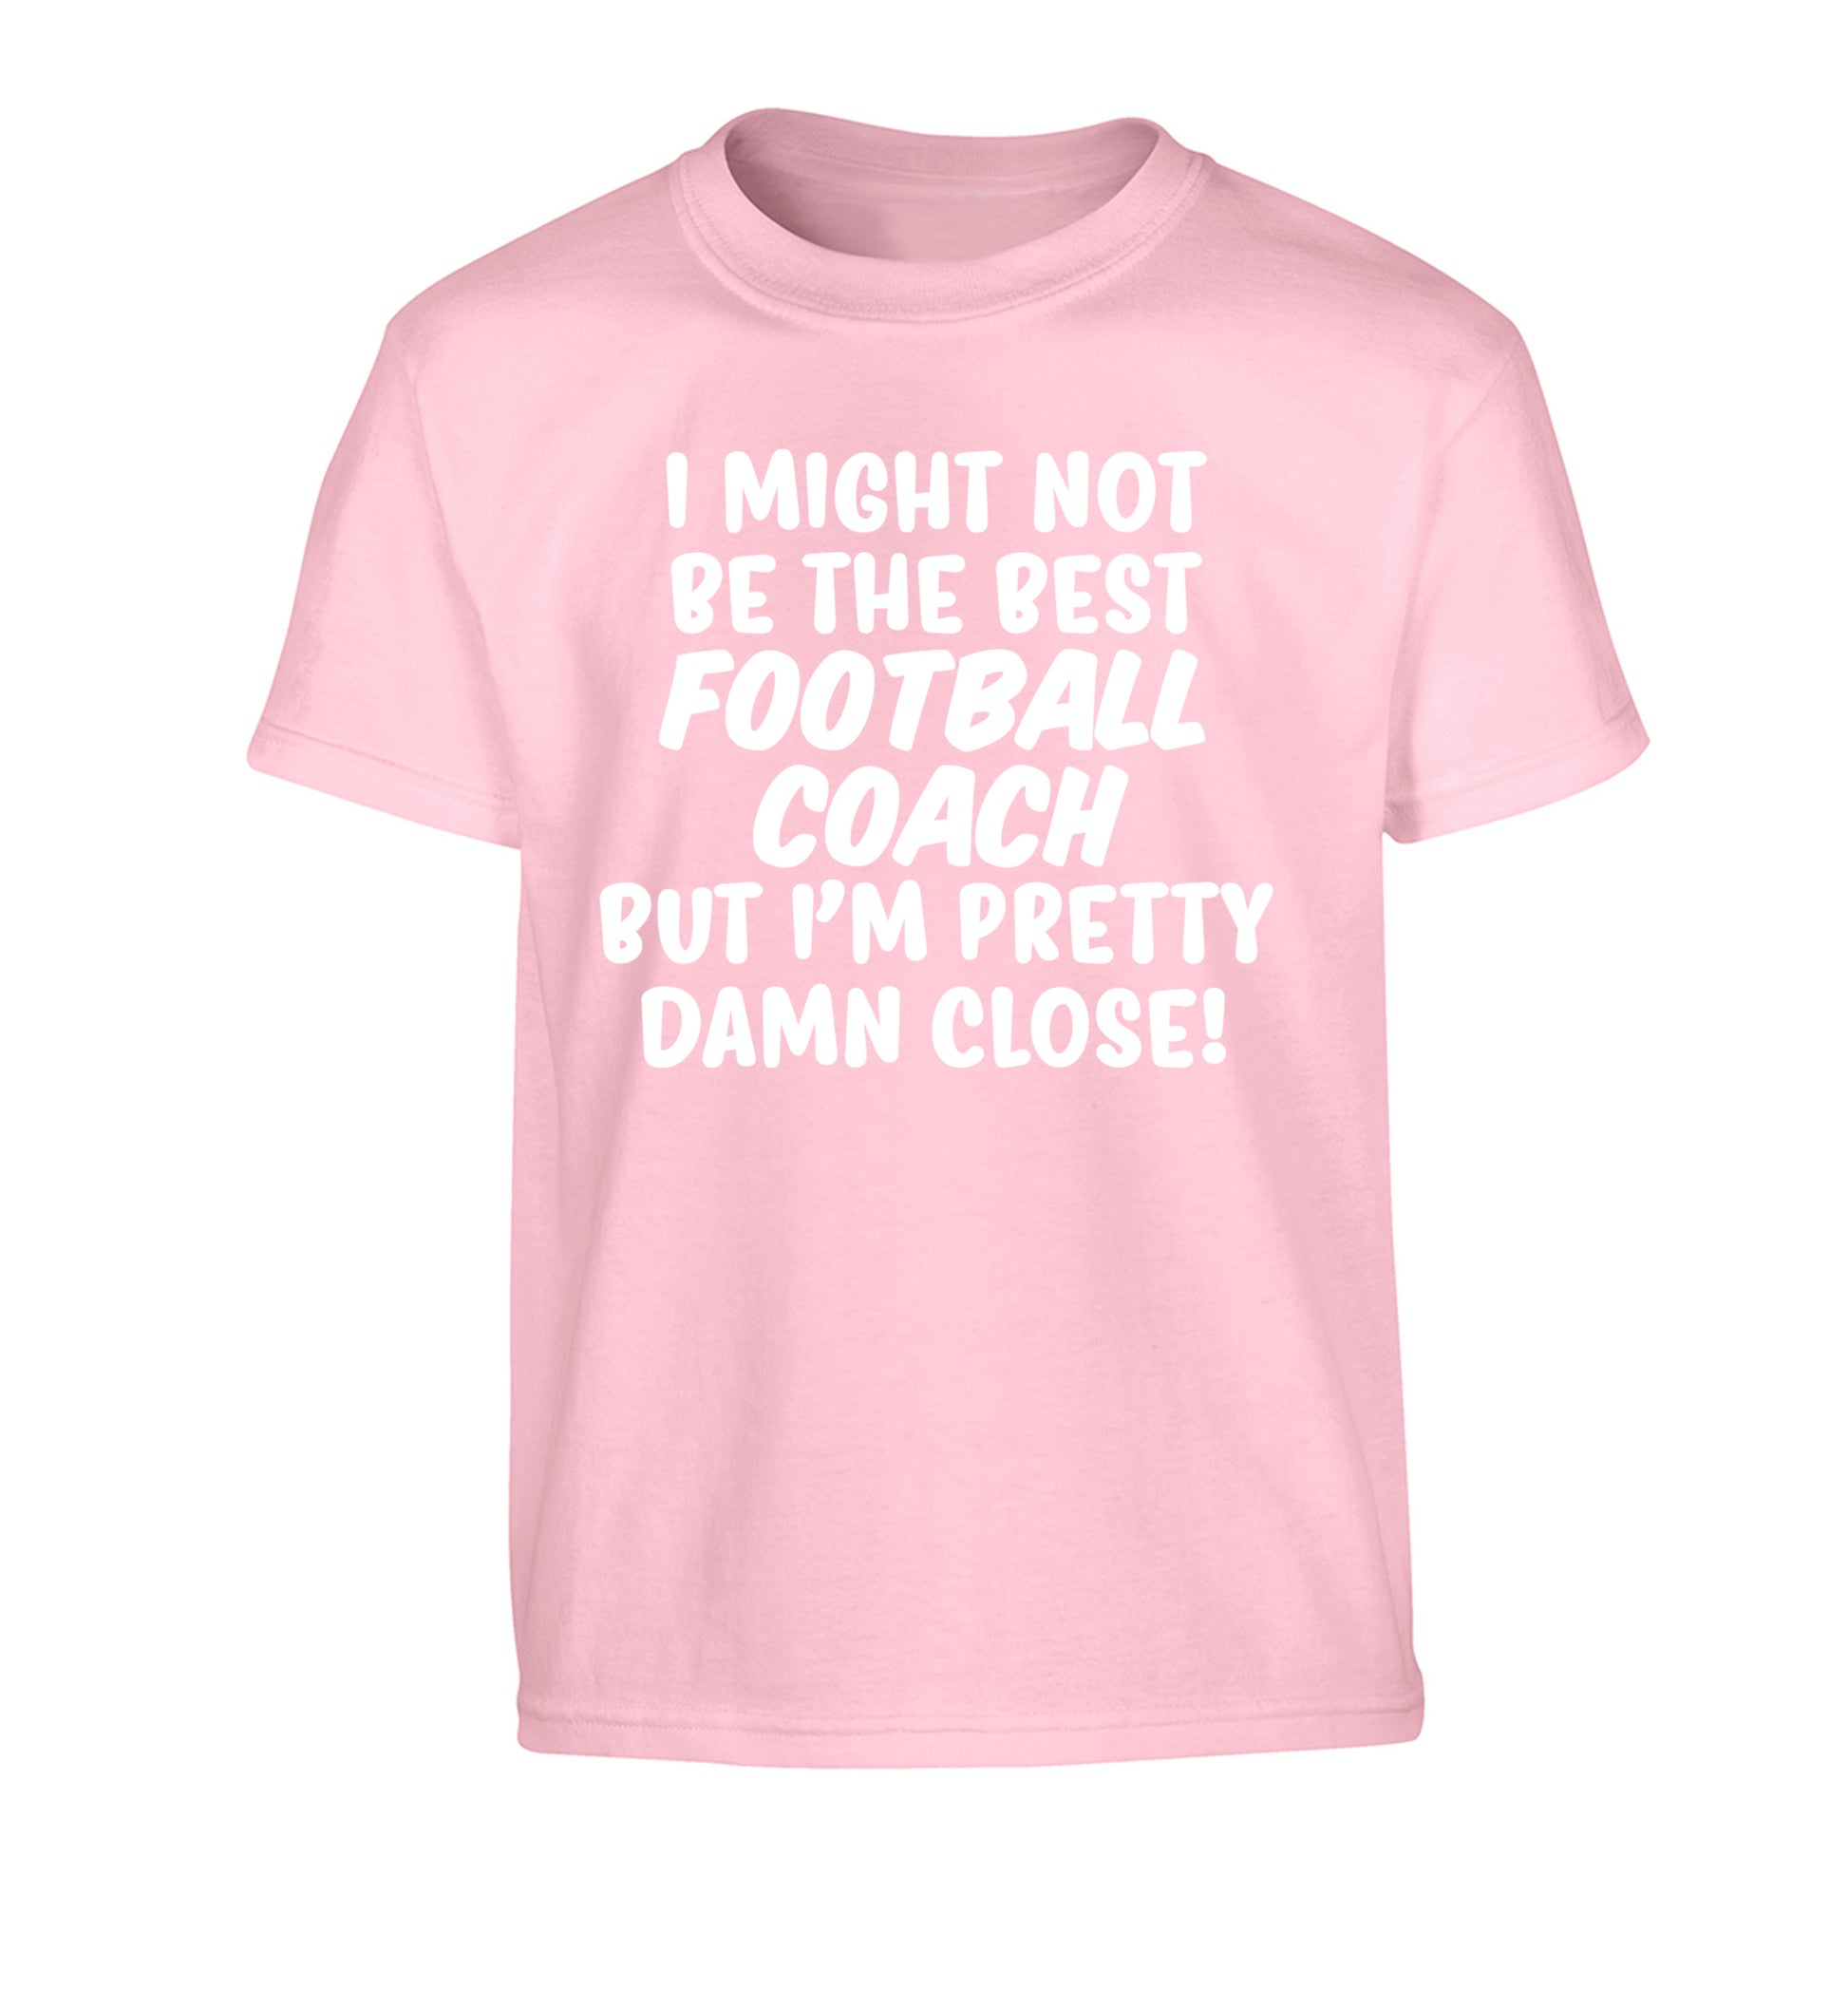 I might not be the best football coach but I'm pretty close! Children's light pink Tshirt 12-14 Years